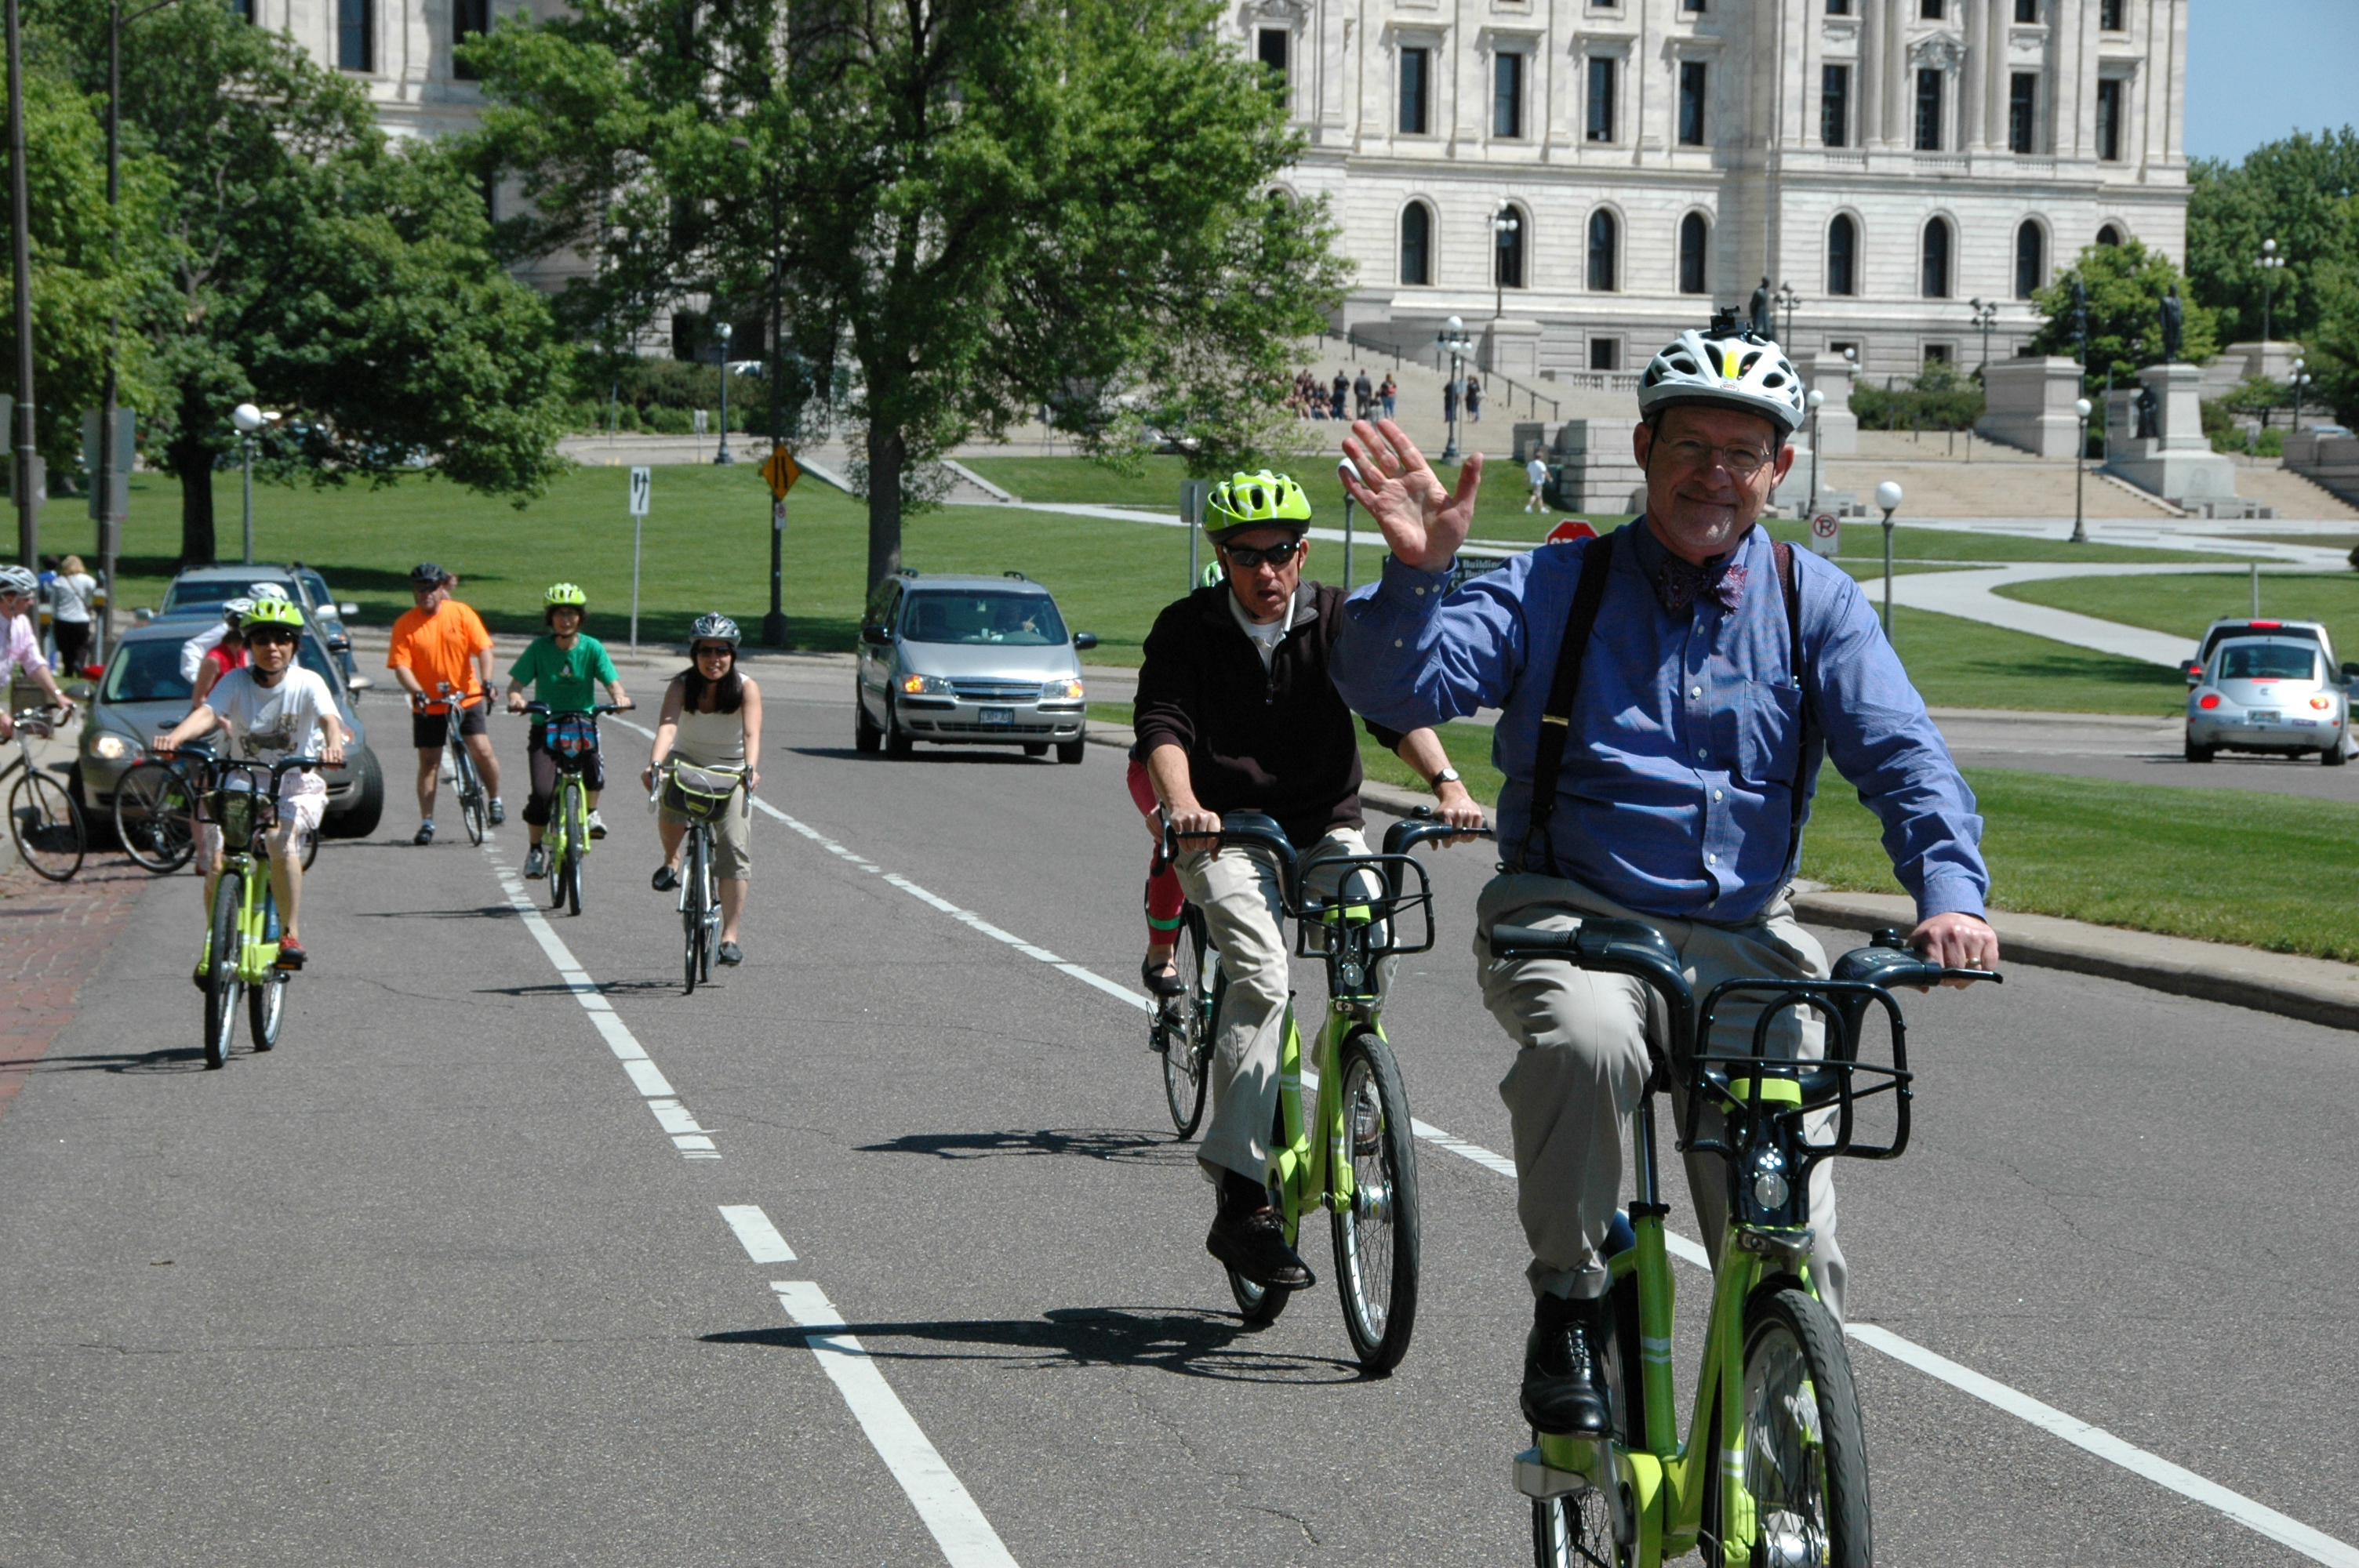 Riding Nice Rides past the Minnesota State Capitol